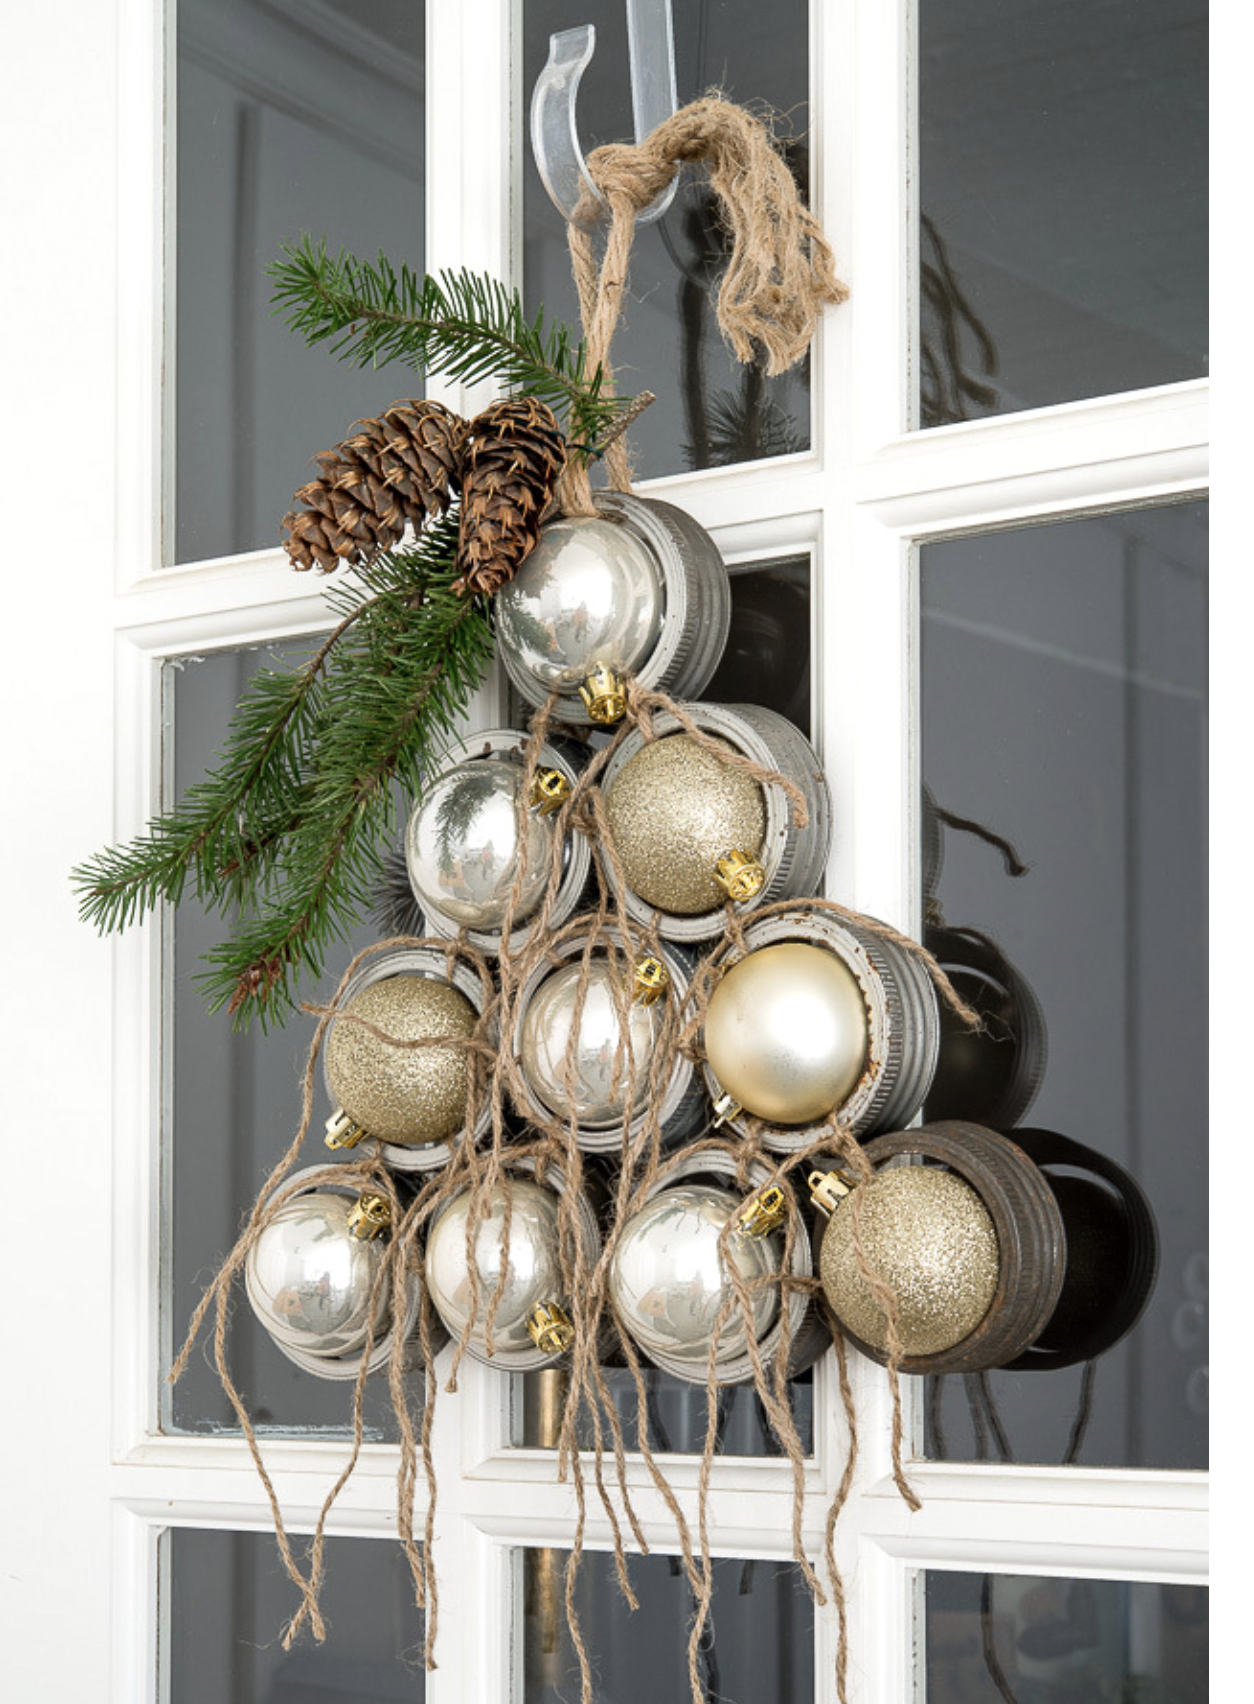 Deck Your Halls: Over 50 DIY Christmas Decorations to Make - DIY Candy